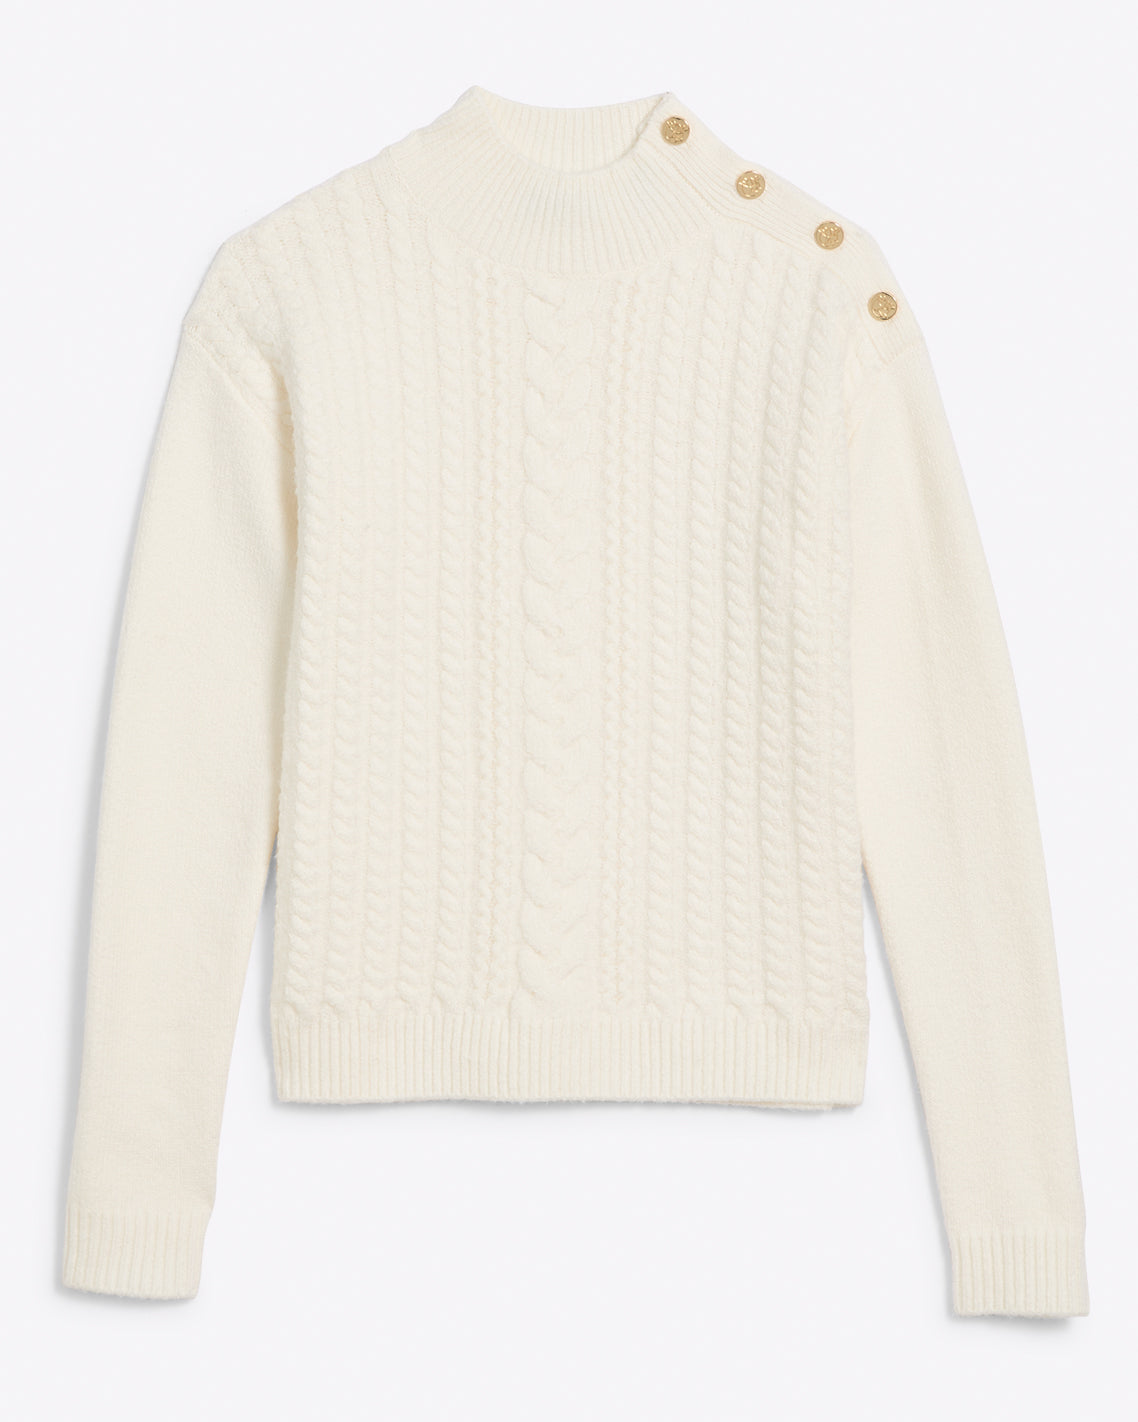 Cableknit Turtleneck Sweater in Magnolia White